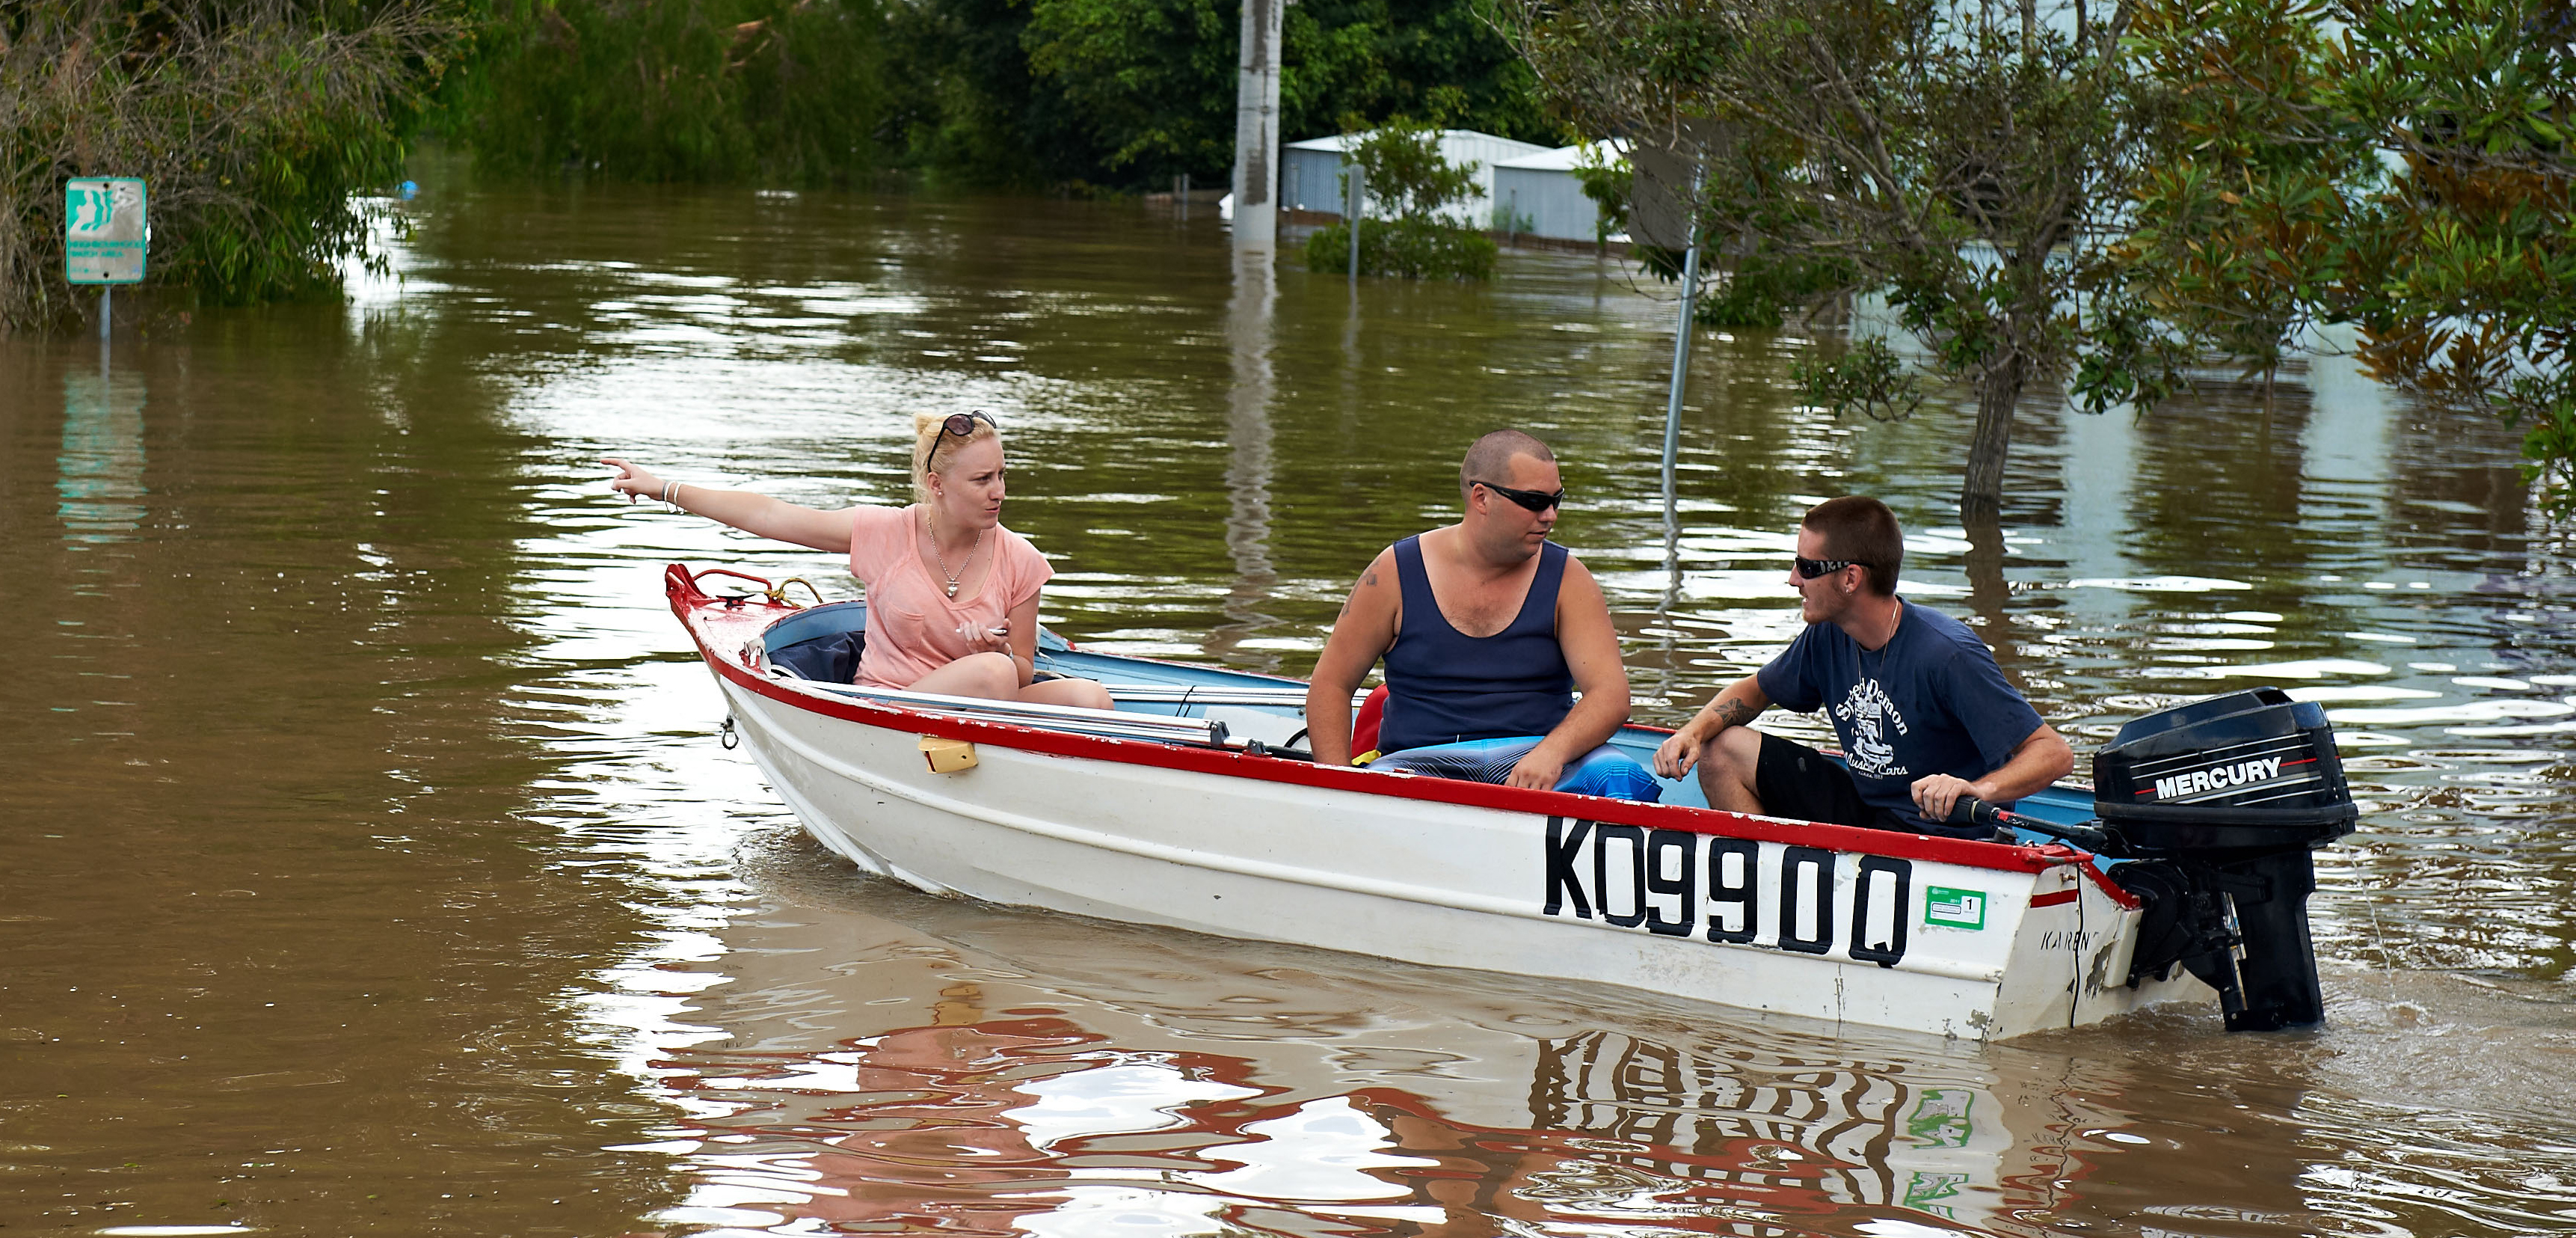 Three people navigate the flood waters in Brisbane, Australia, after heavy flooding hit the region in 2011. Photo by Mark Nemeth/Alamy Stock Photo